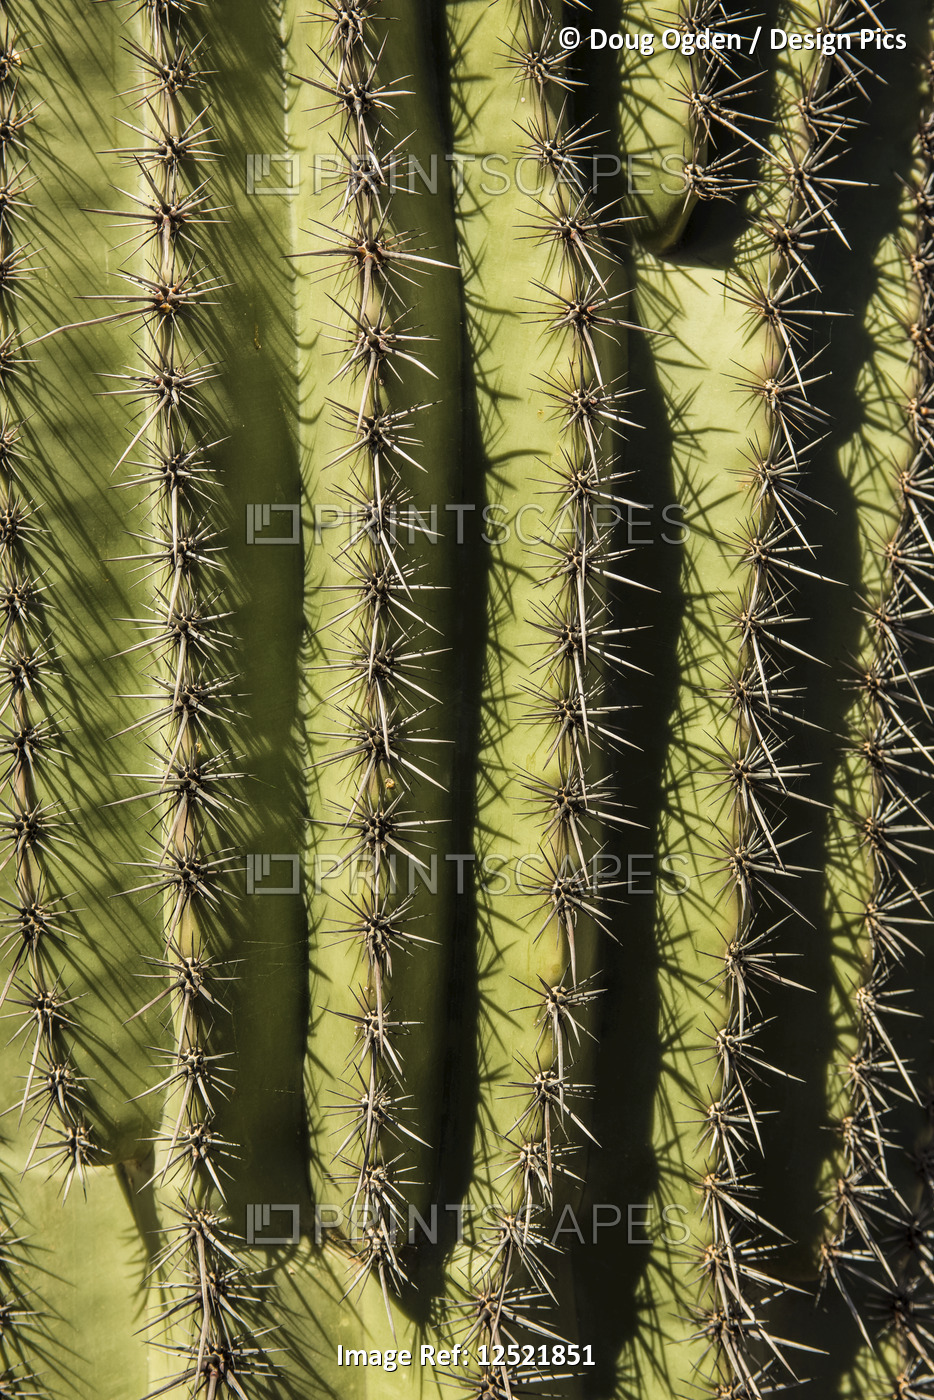 Spines of the Saguaro Cactus